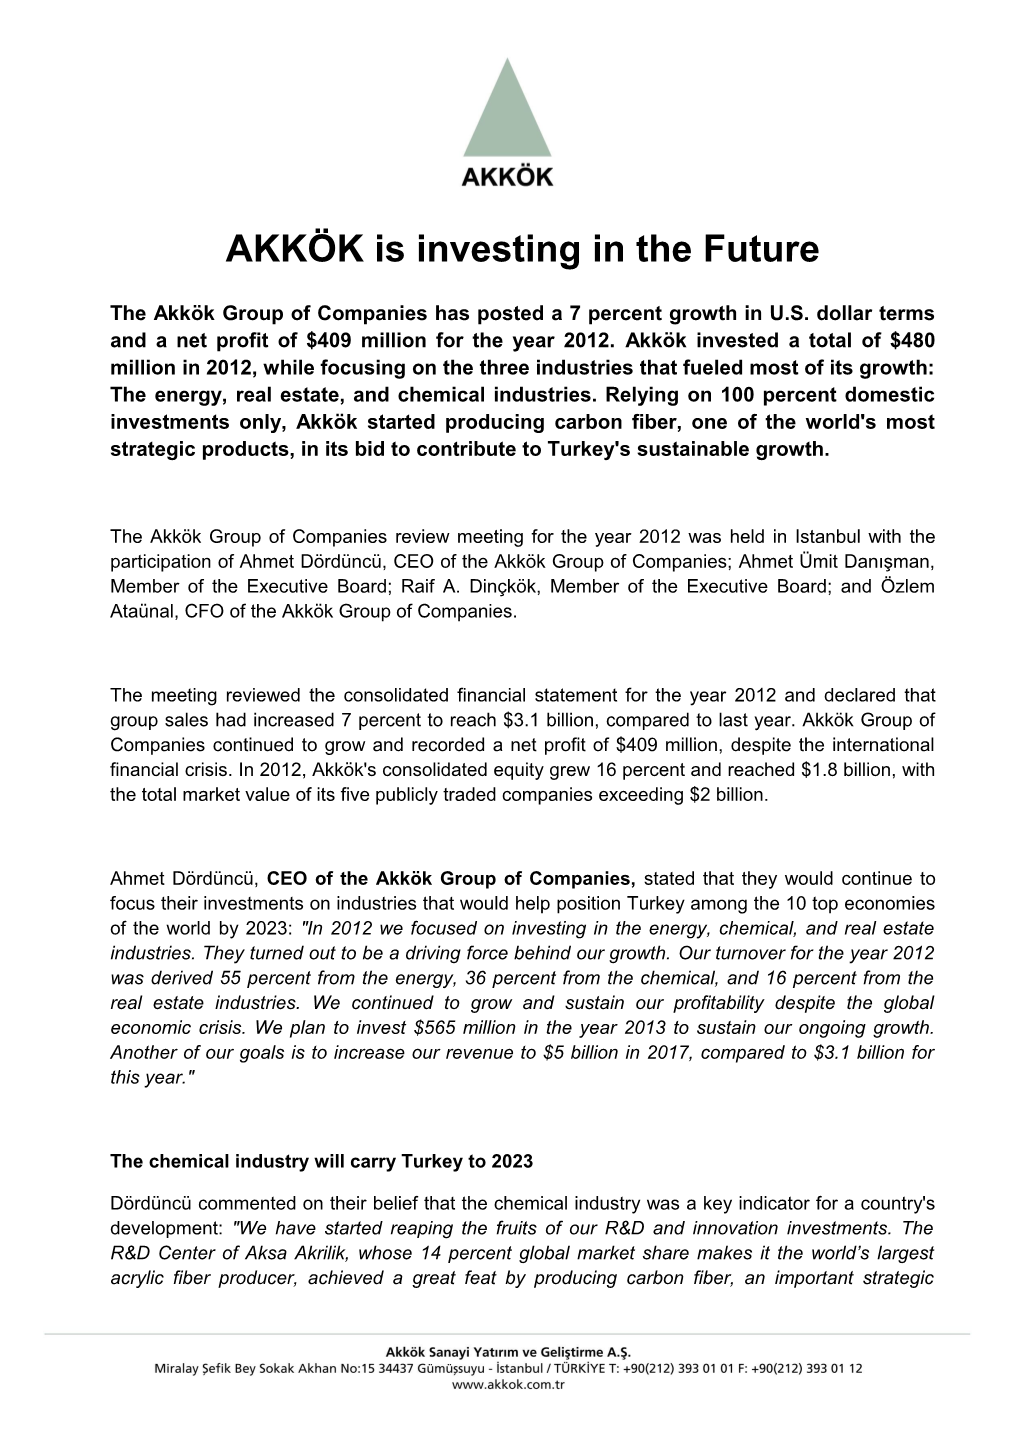 AKKÖK Is Investing in the Future